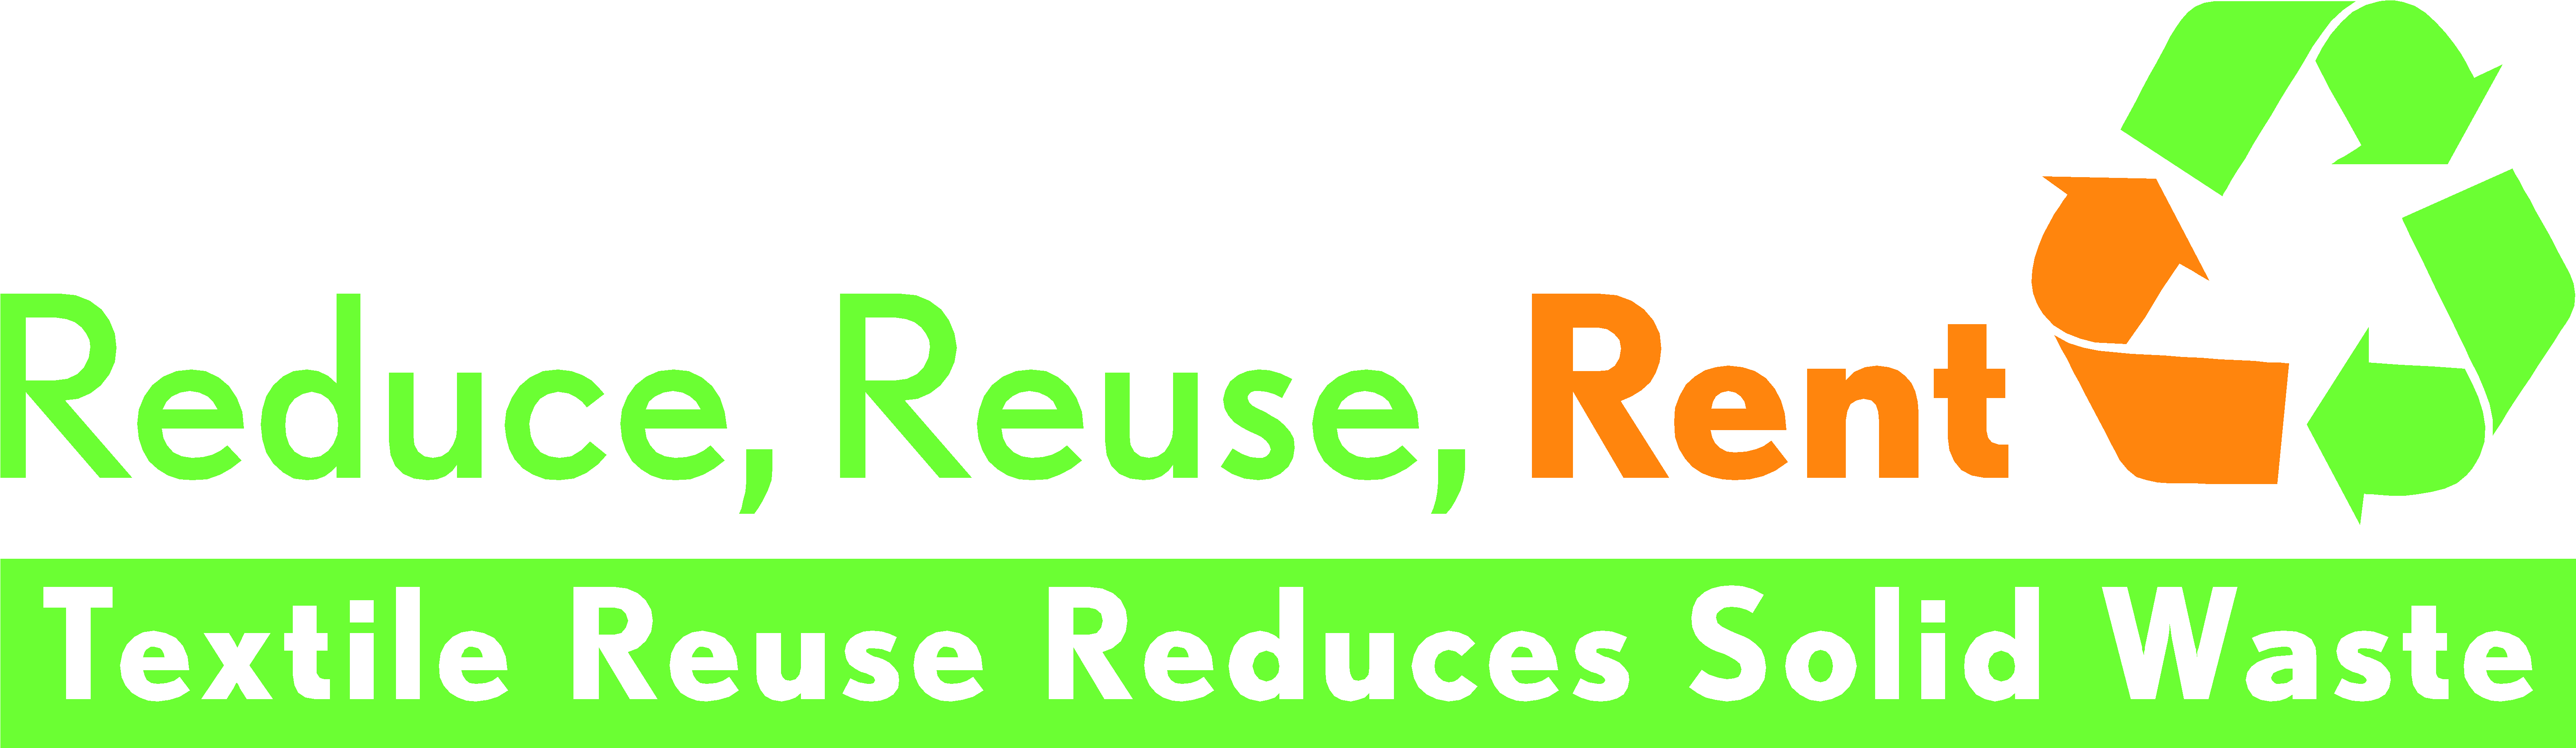 Textile Recycling Slogan PNG image